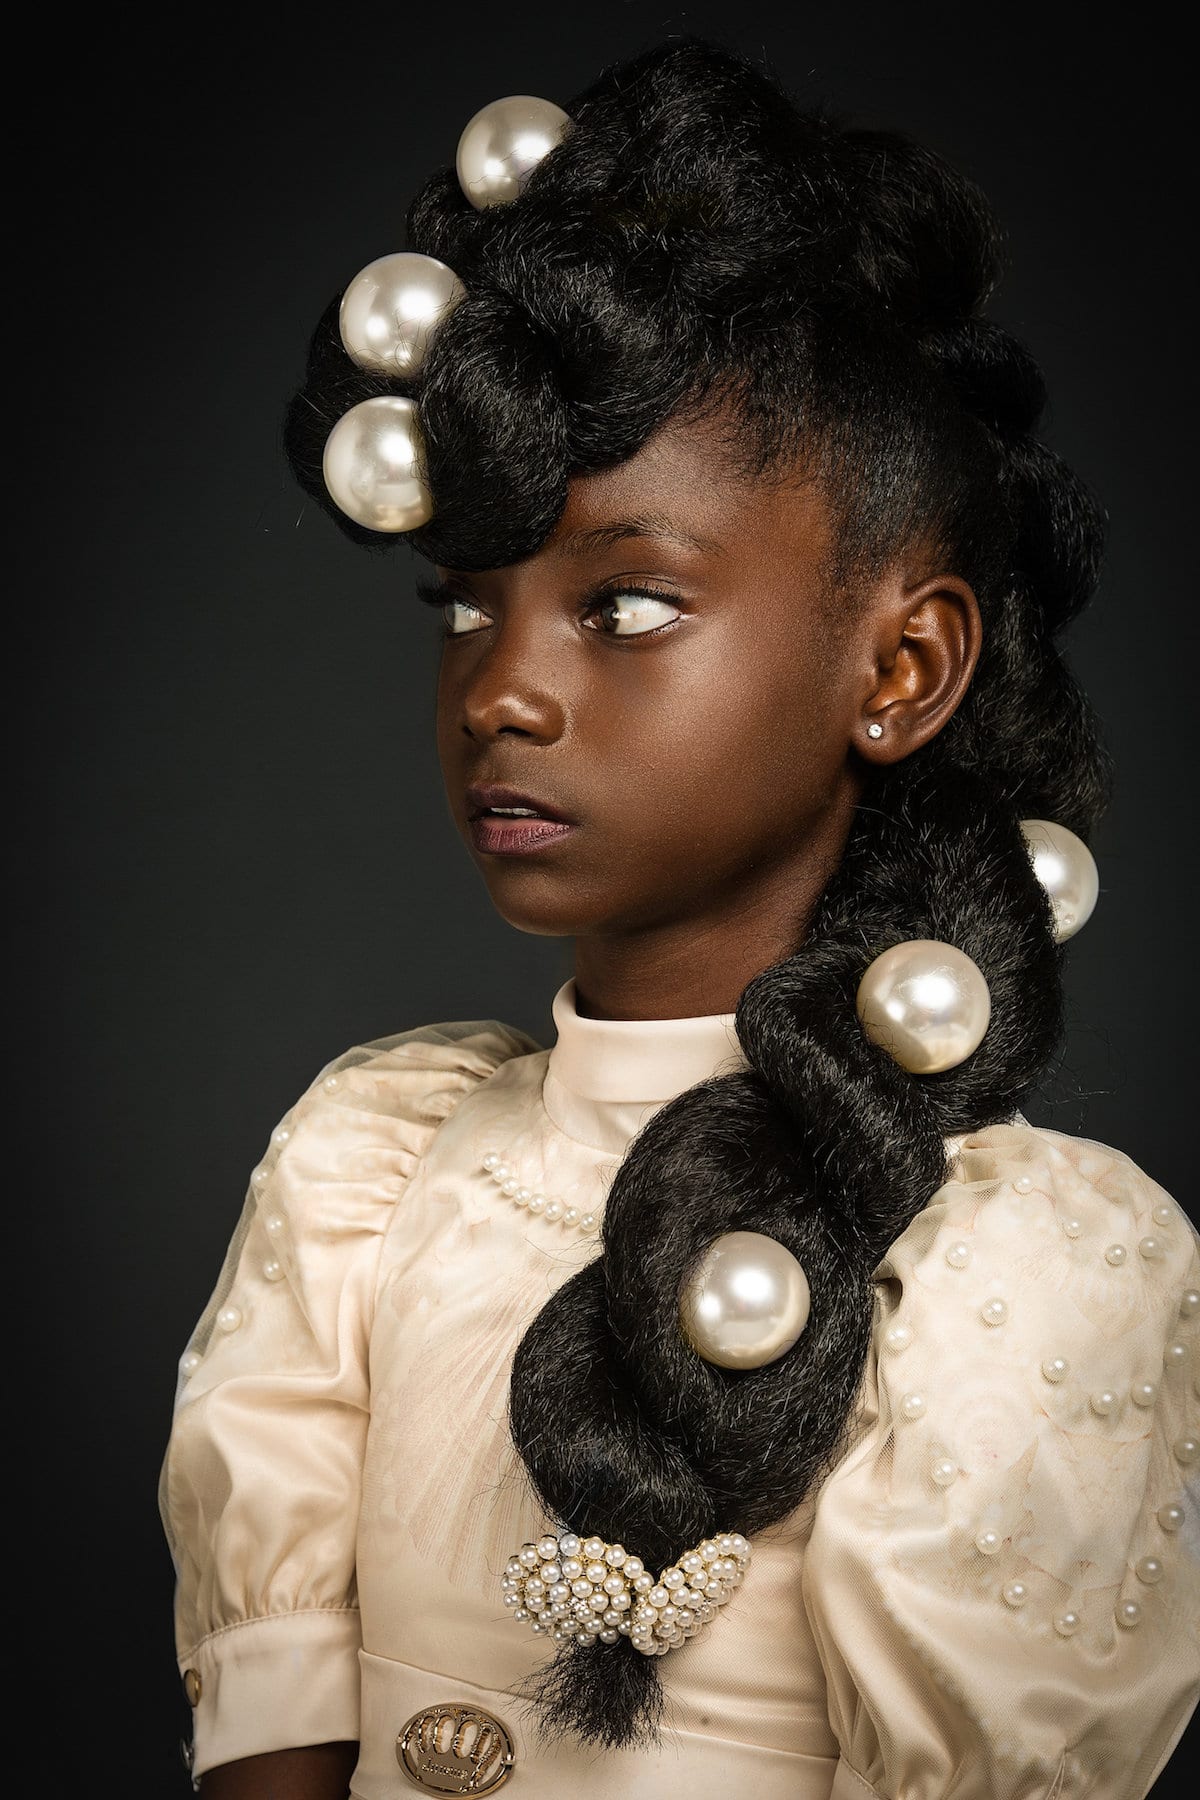 High-Fashion Afro Art Shows Portraits of Girls Rocking Their Natural Hair